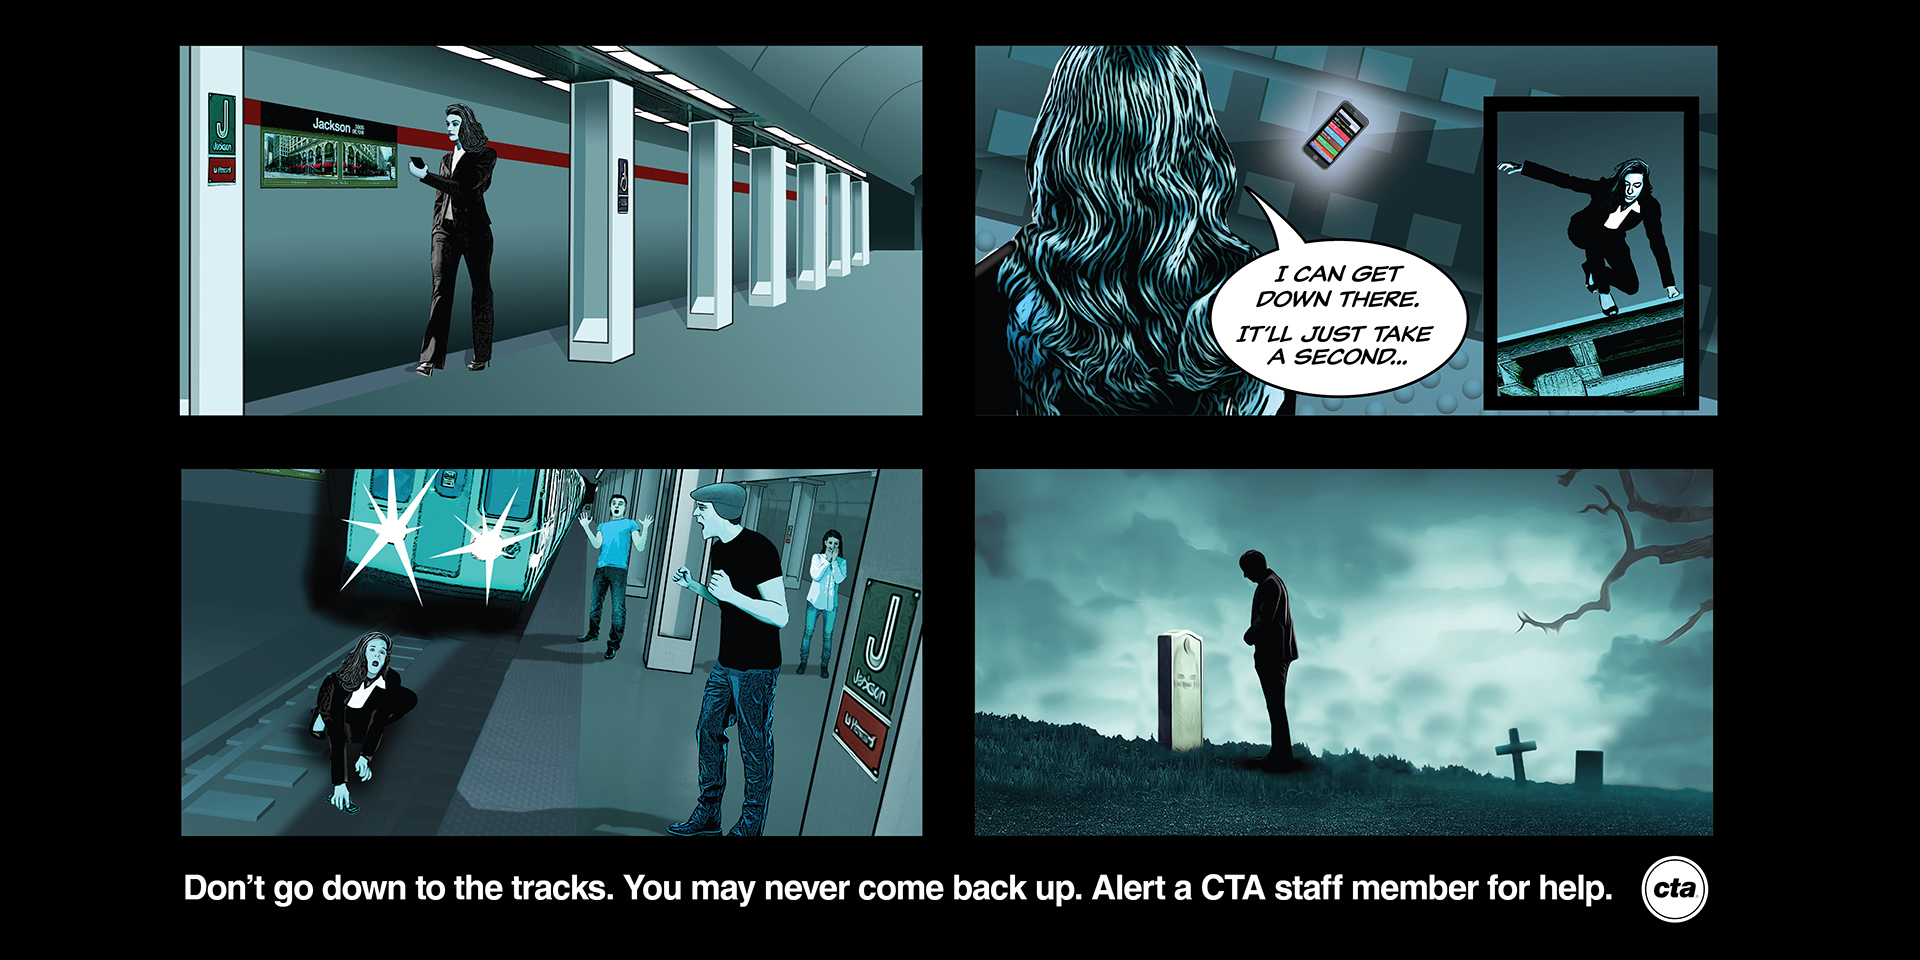 Poster in a graphic novel style with four panels. Someone drops a phone. I can get down there. It'll just take a second. Train comes. Cut to graveyard. Don't go down to the tracks. You may never come back up. Alert a CTA staff member for help.